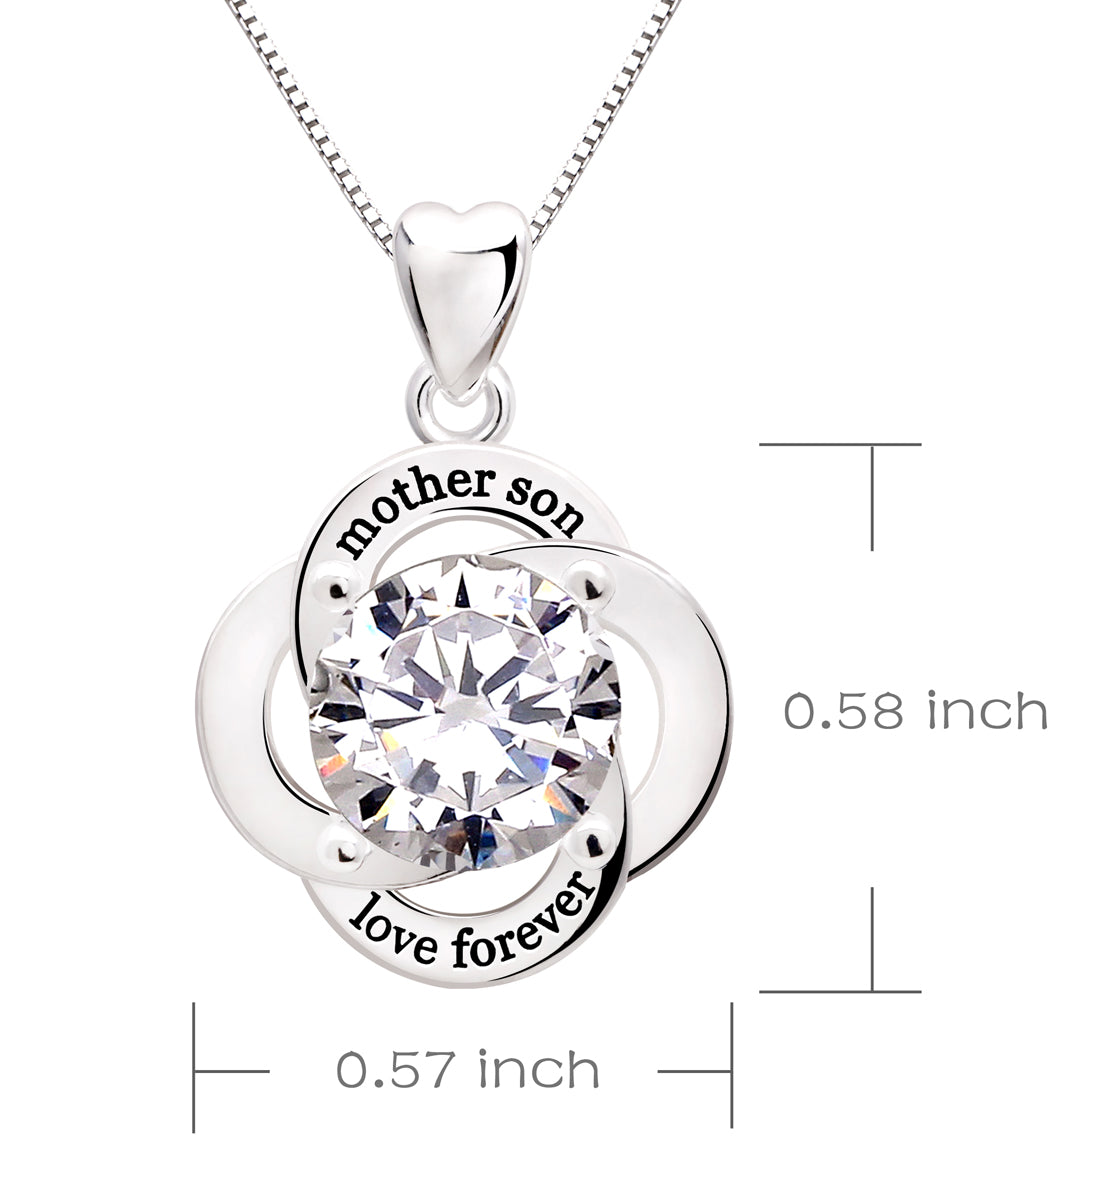 ALOV Jewelry Sterling Silver mother son love forever Cubic Zirconia Pendant Necklace